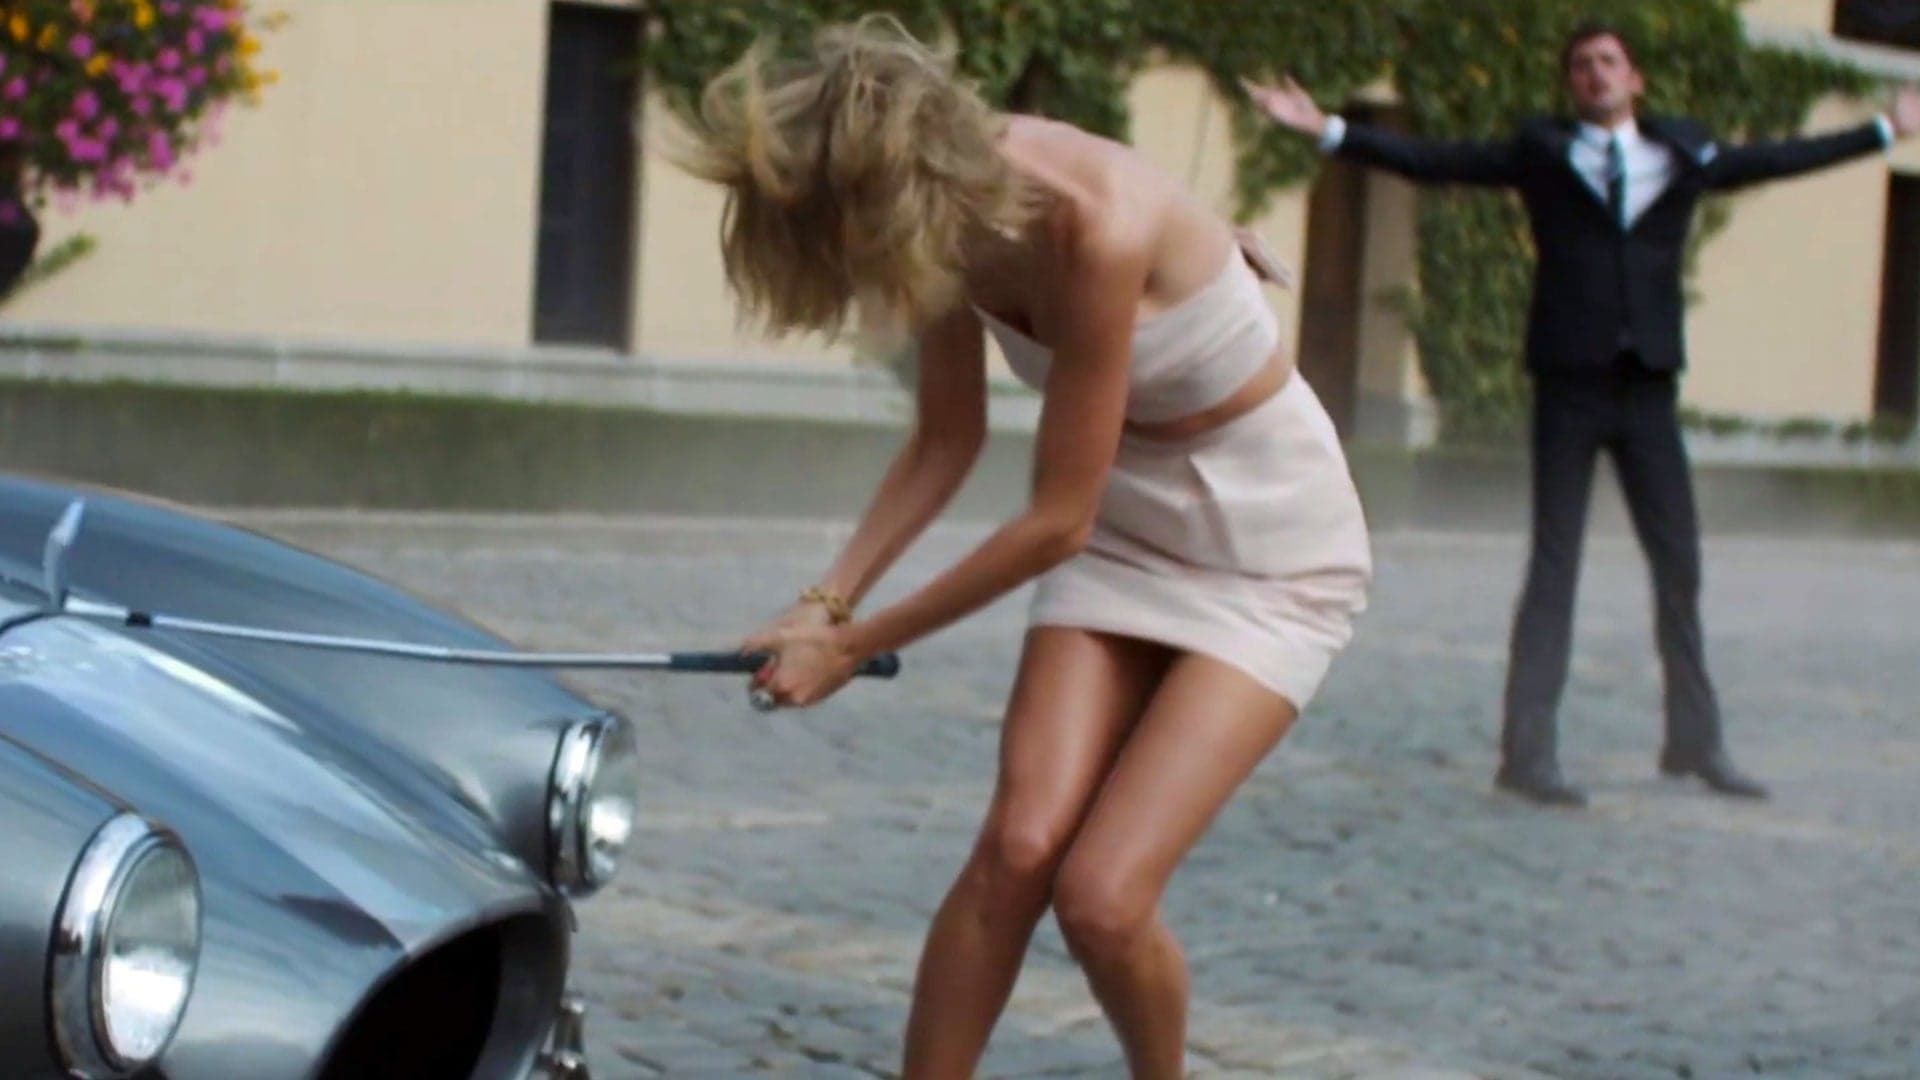 Pop Culture Says If You Cheat, a Famous Female Recording Artist Will Smash Your Car Windows